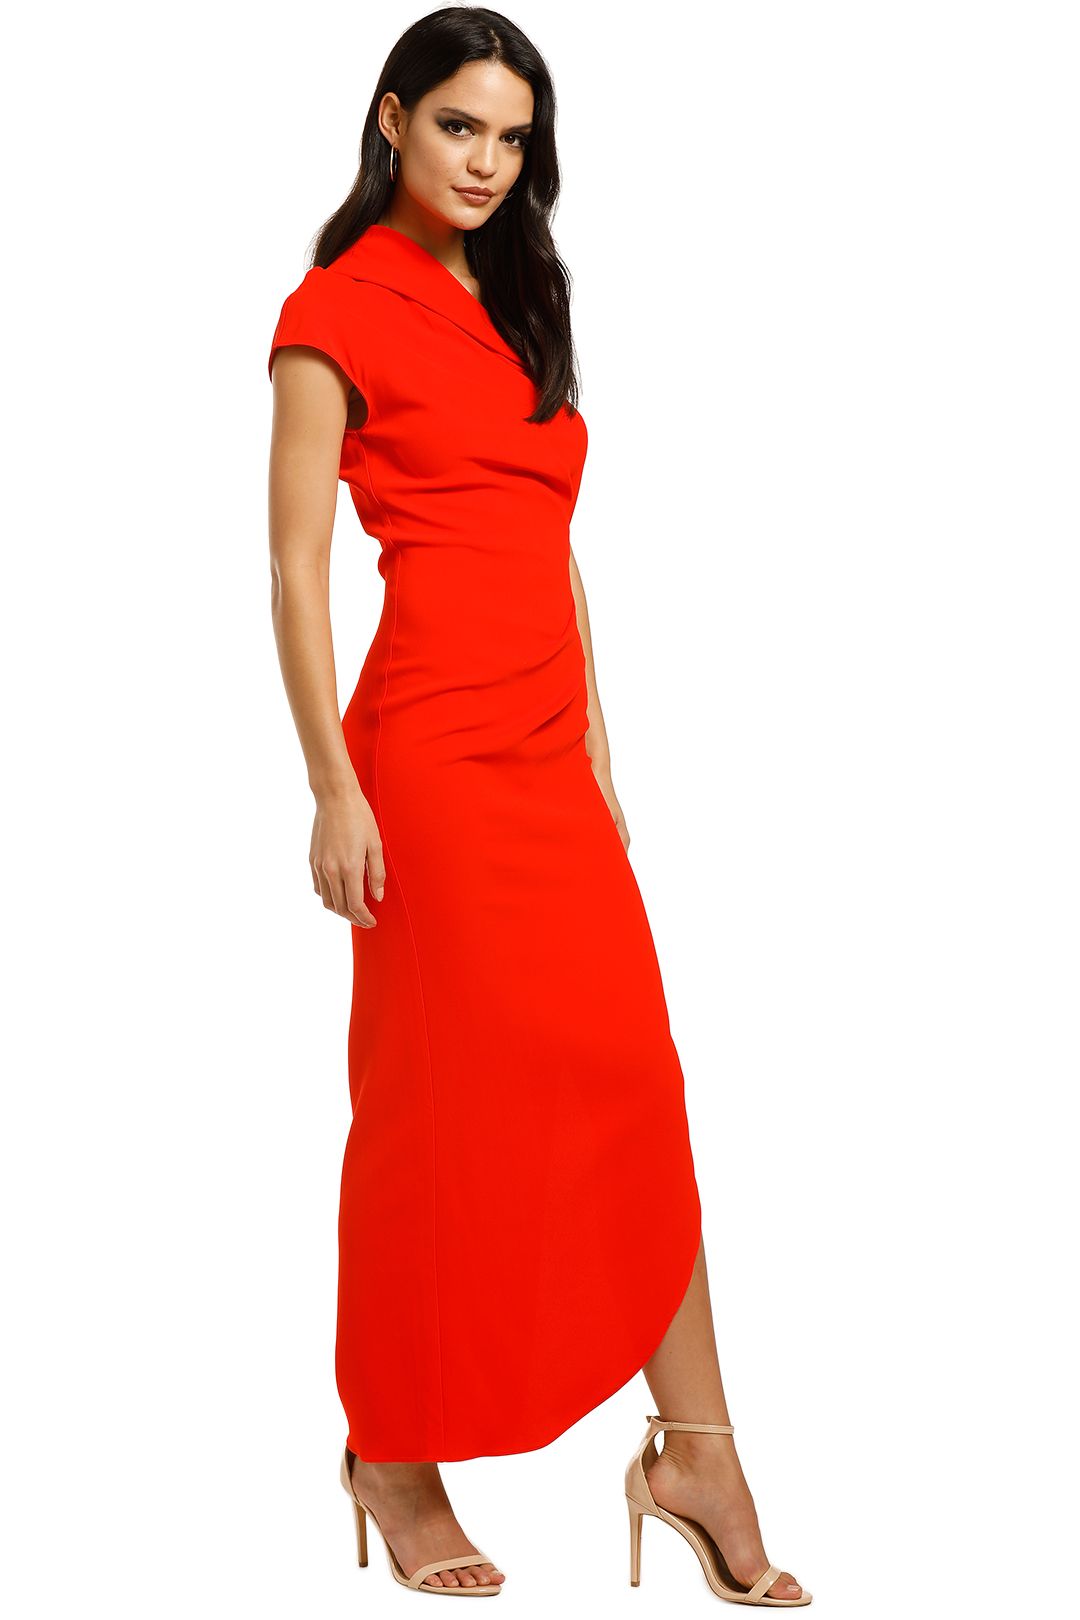 Ginger-and-Smart-Curator-Gown-Kinetic-Red-Side